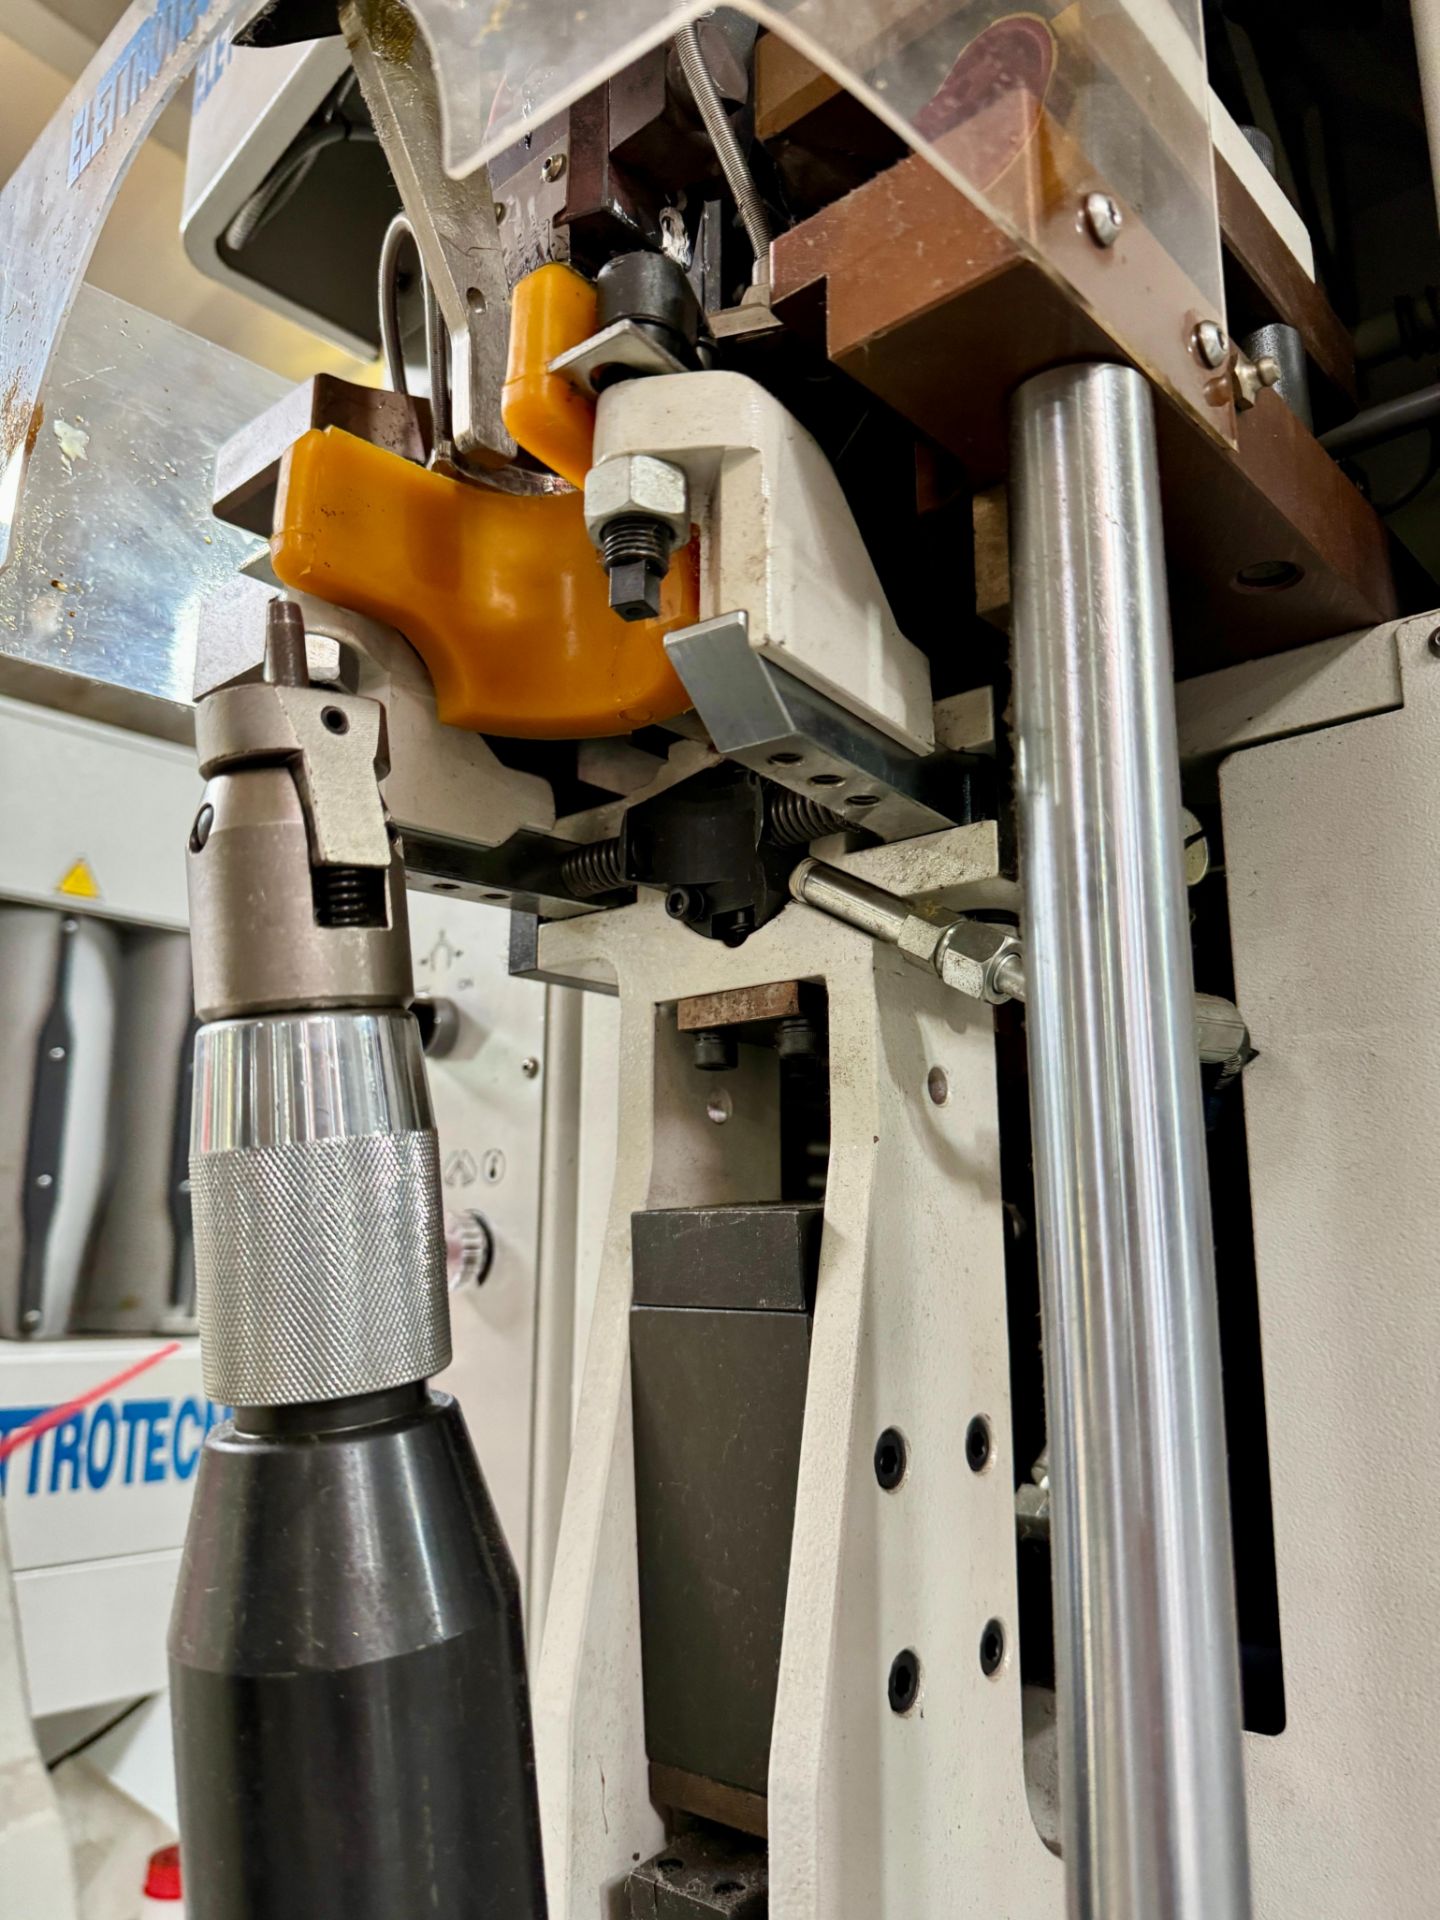 2019 ELETTROTECNICA B.C. HEEL LASTING MACHINE W/ AUTO GLUE AND PROGRAMMABLE PINCERS, MODEL 680 TI - Image 5 of 9